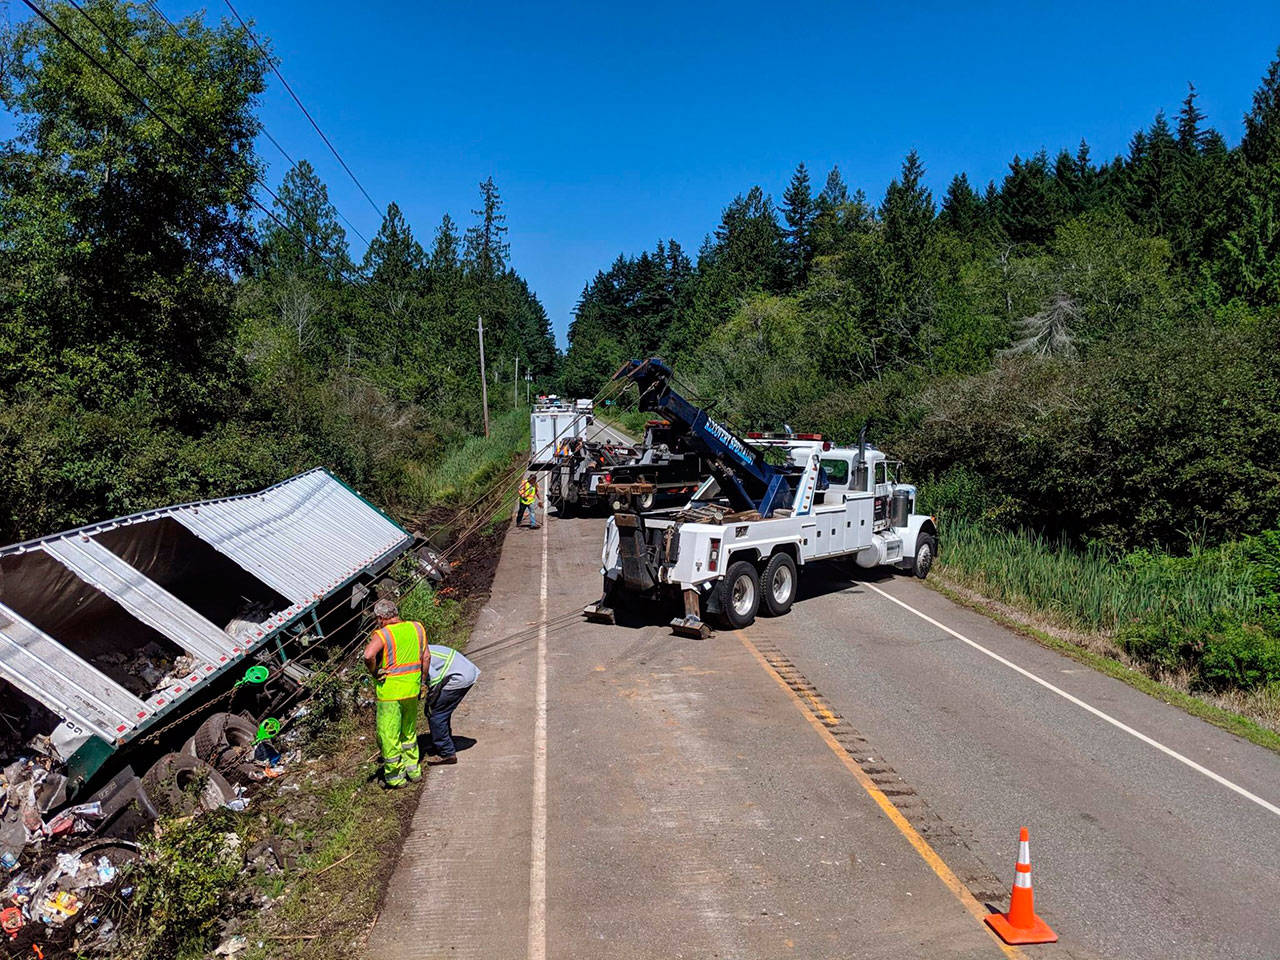 Road crews worked more than 12 hours to clear this trailer wreck that involved a Sequim man who was taken to Harborview Medical Center. Photo courtesy of Washington State Patrol